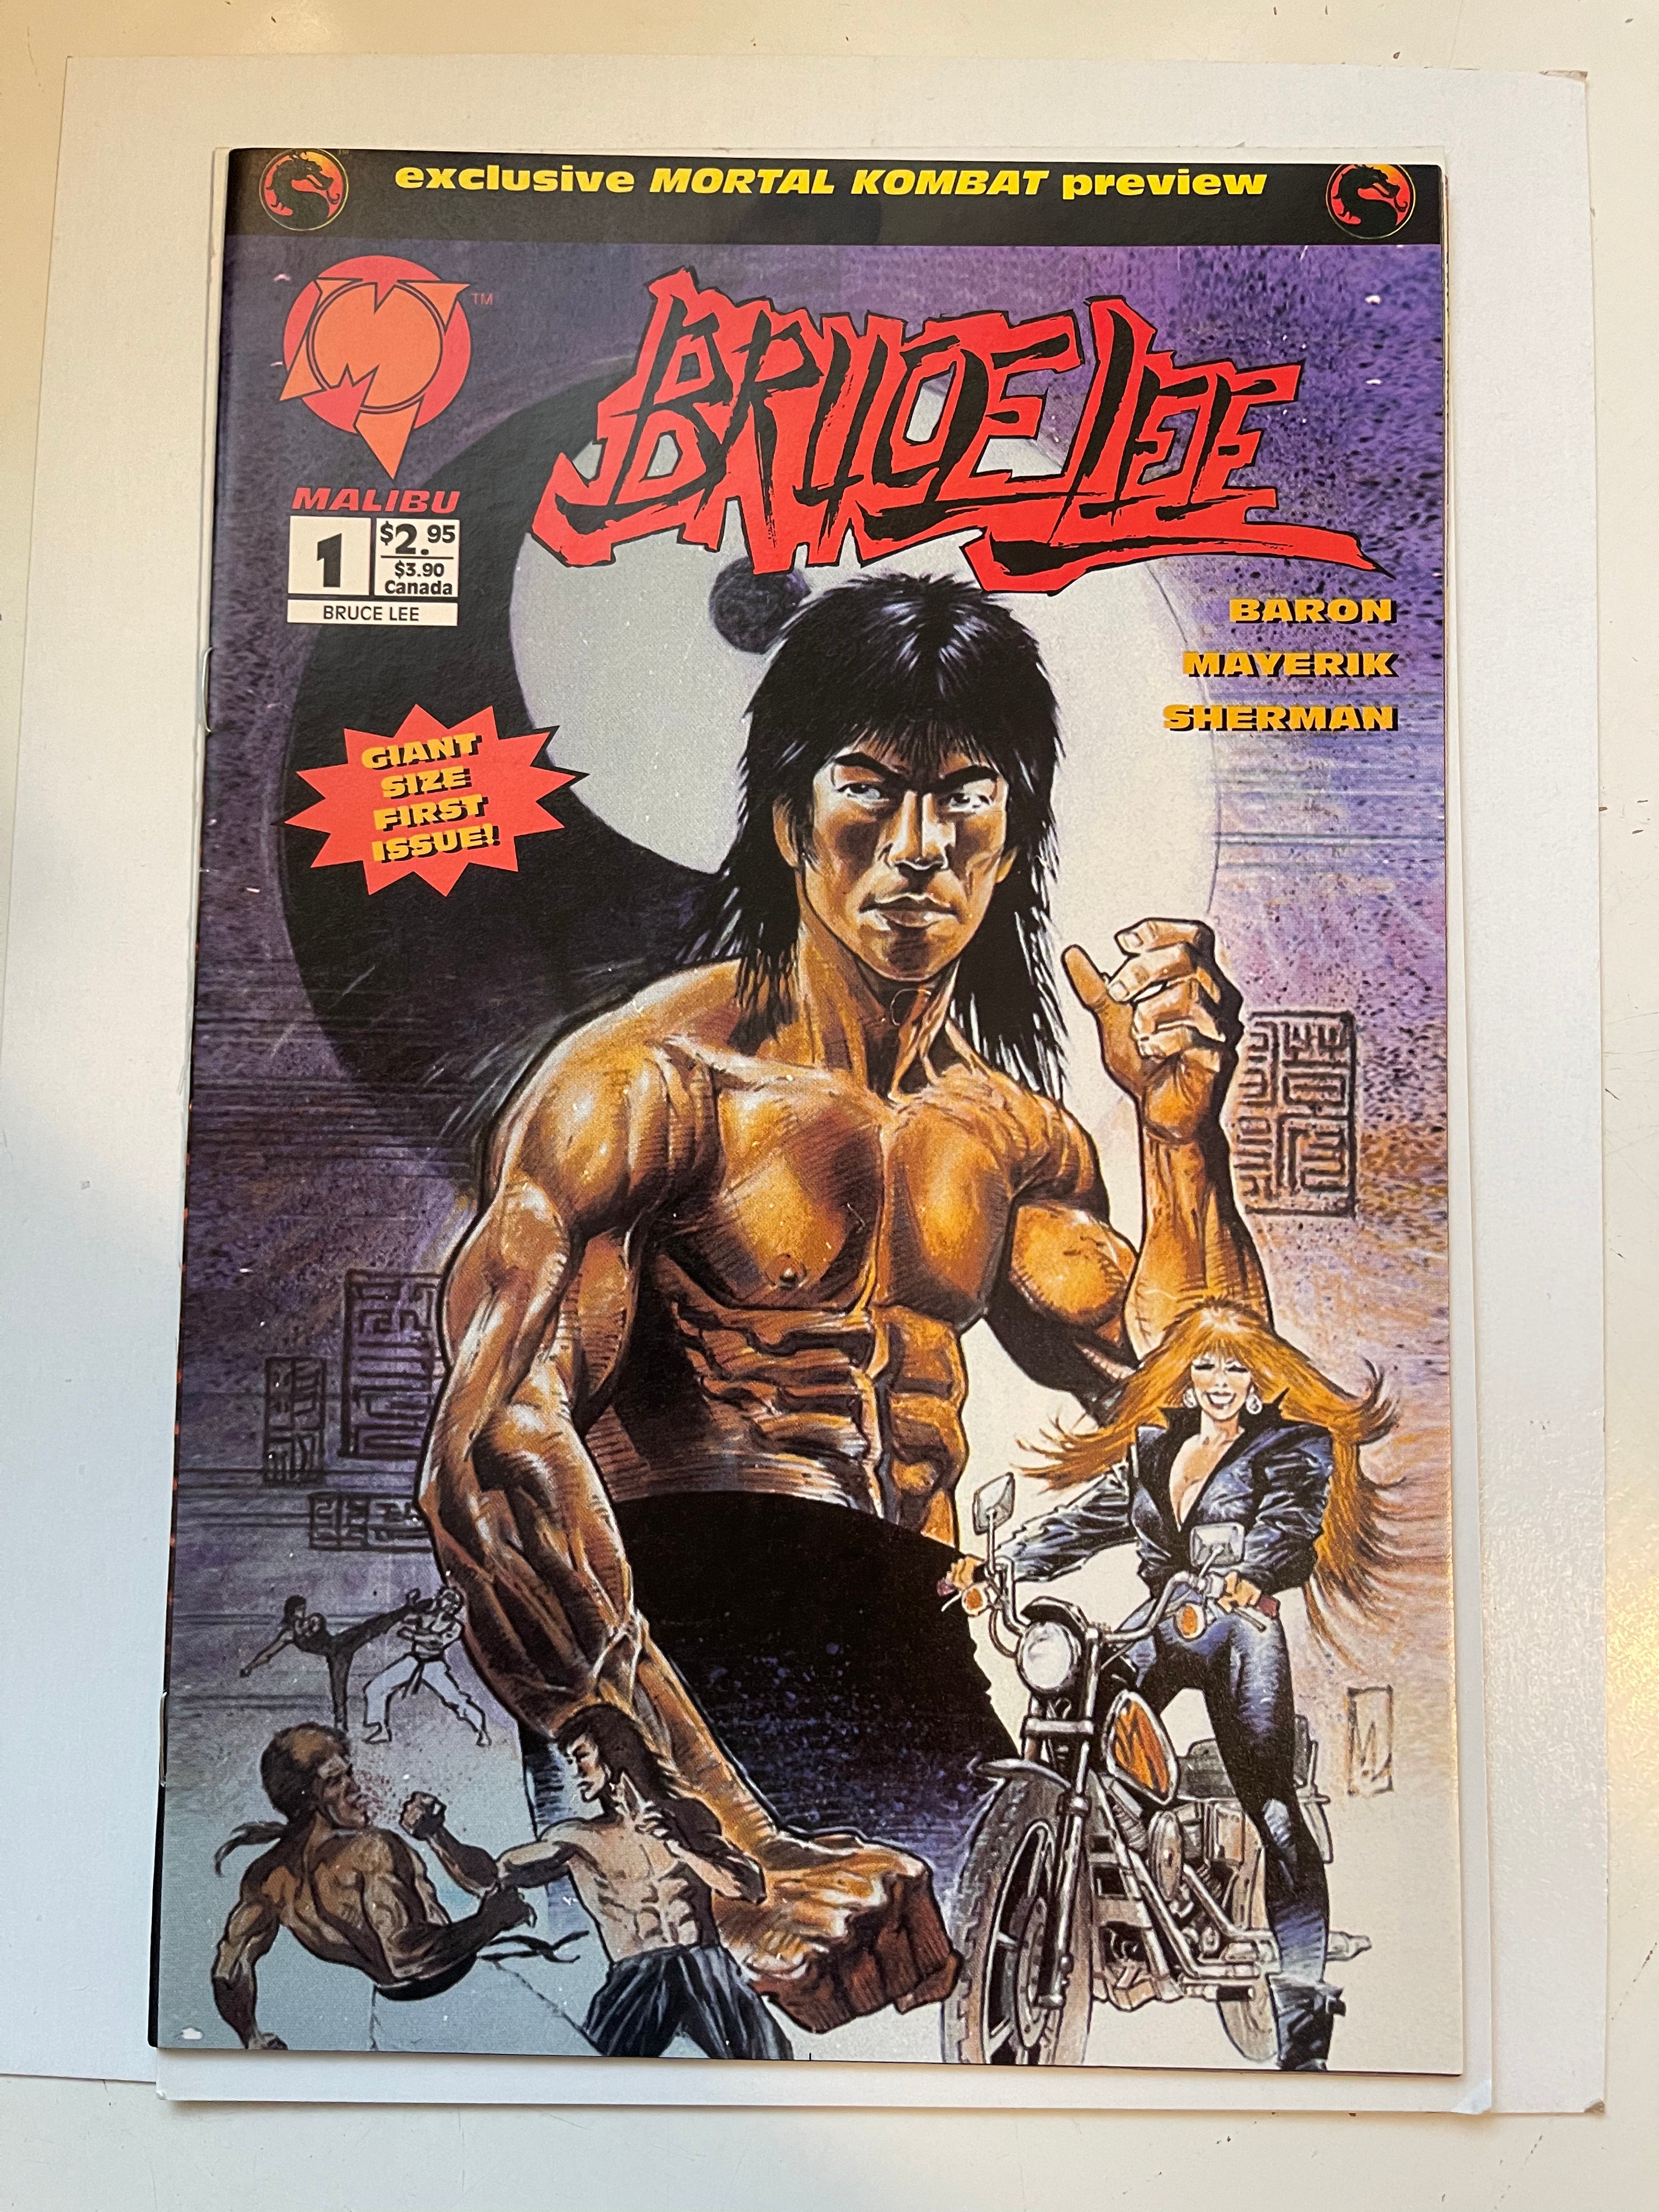 Bruce Lee comic with Mortal Combat preview 1990s